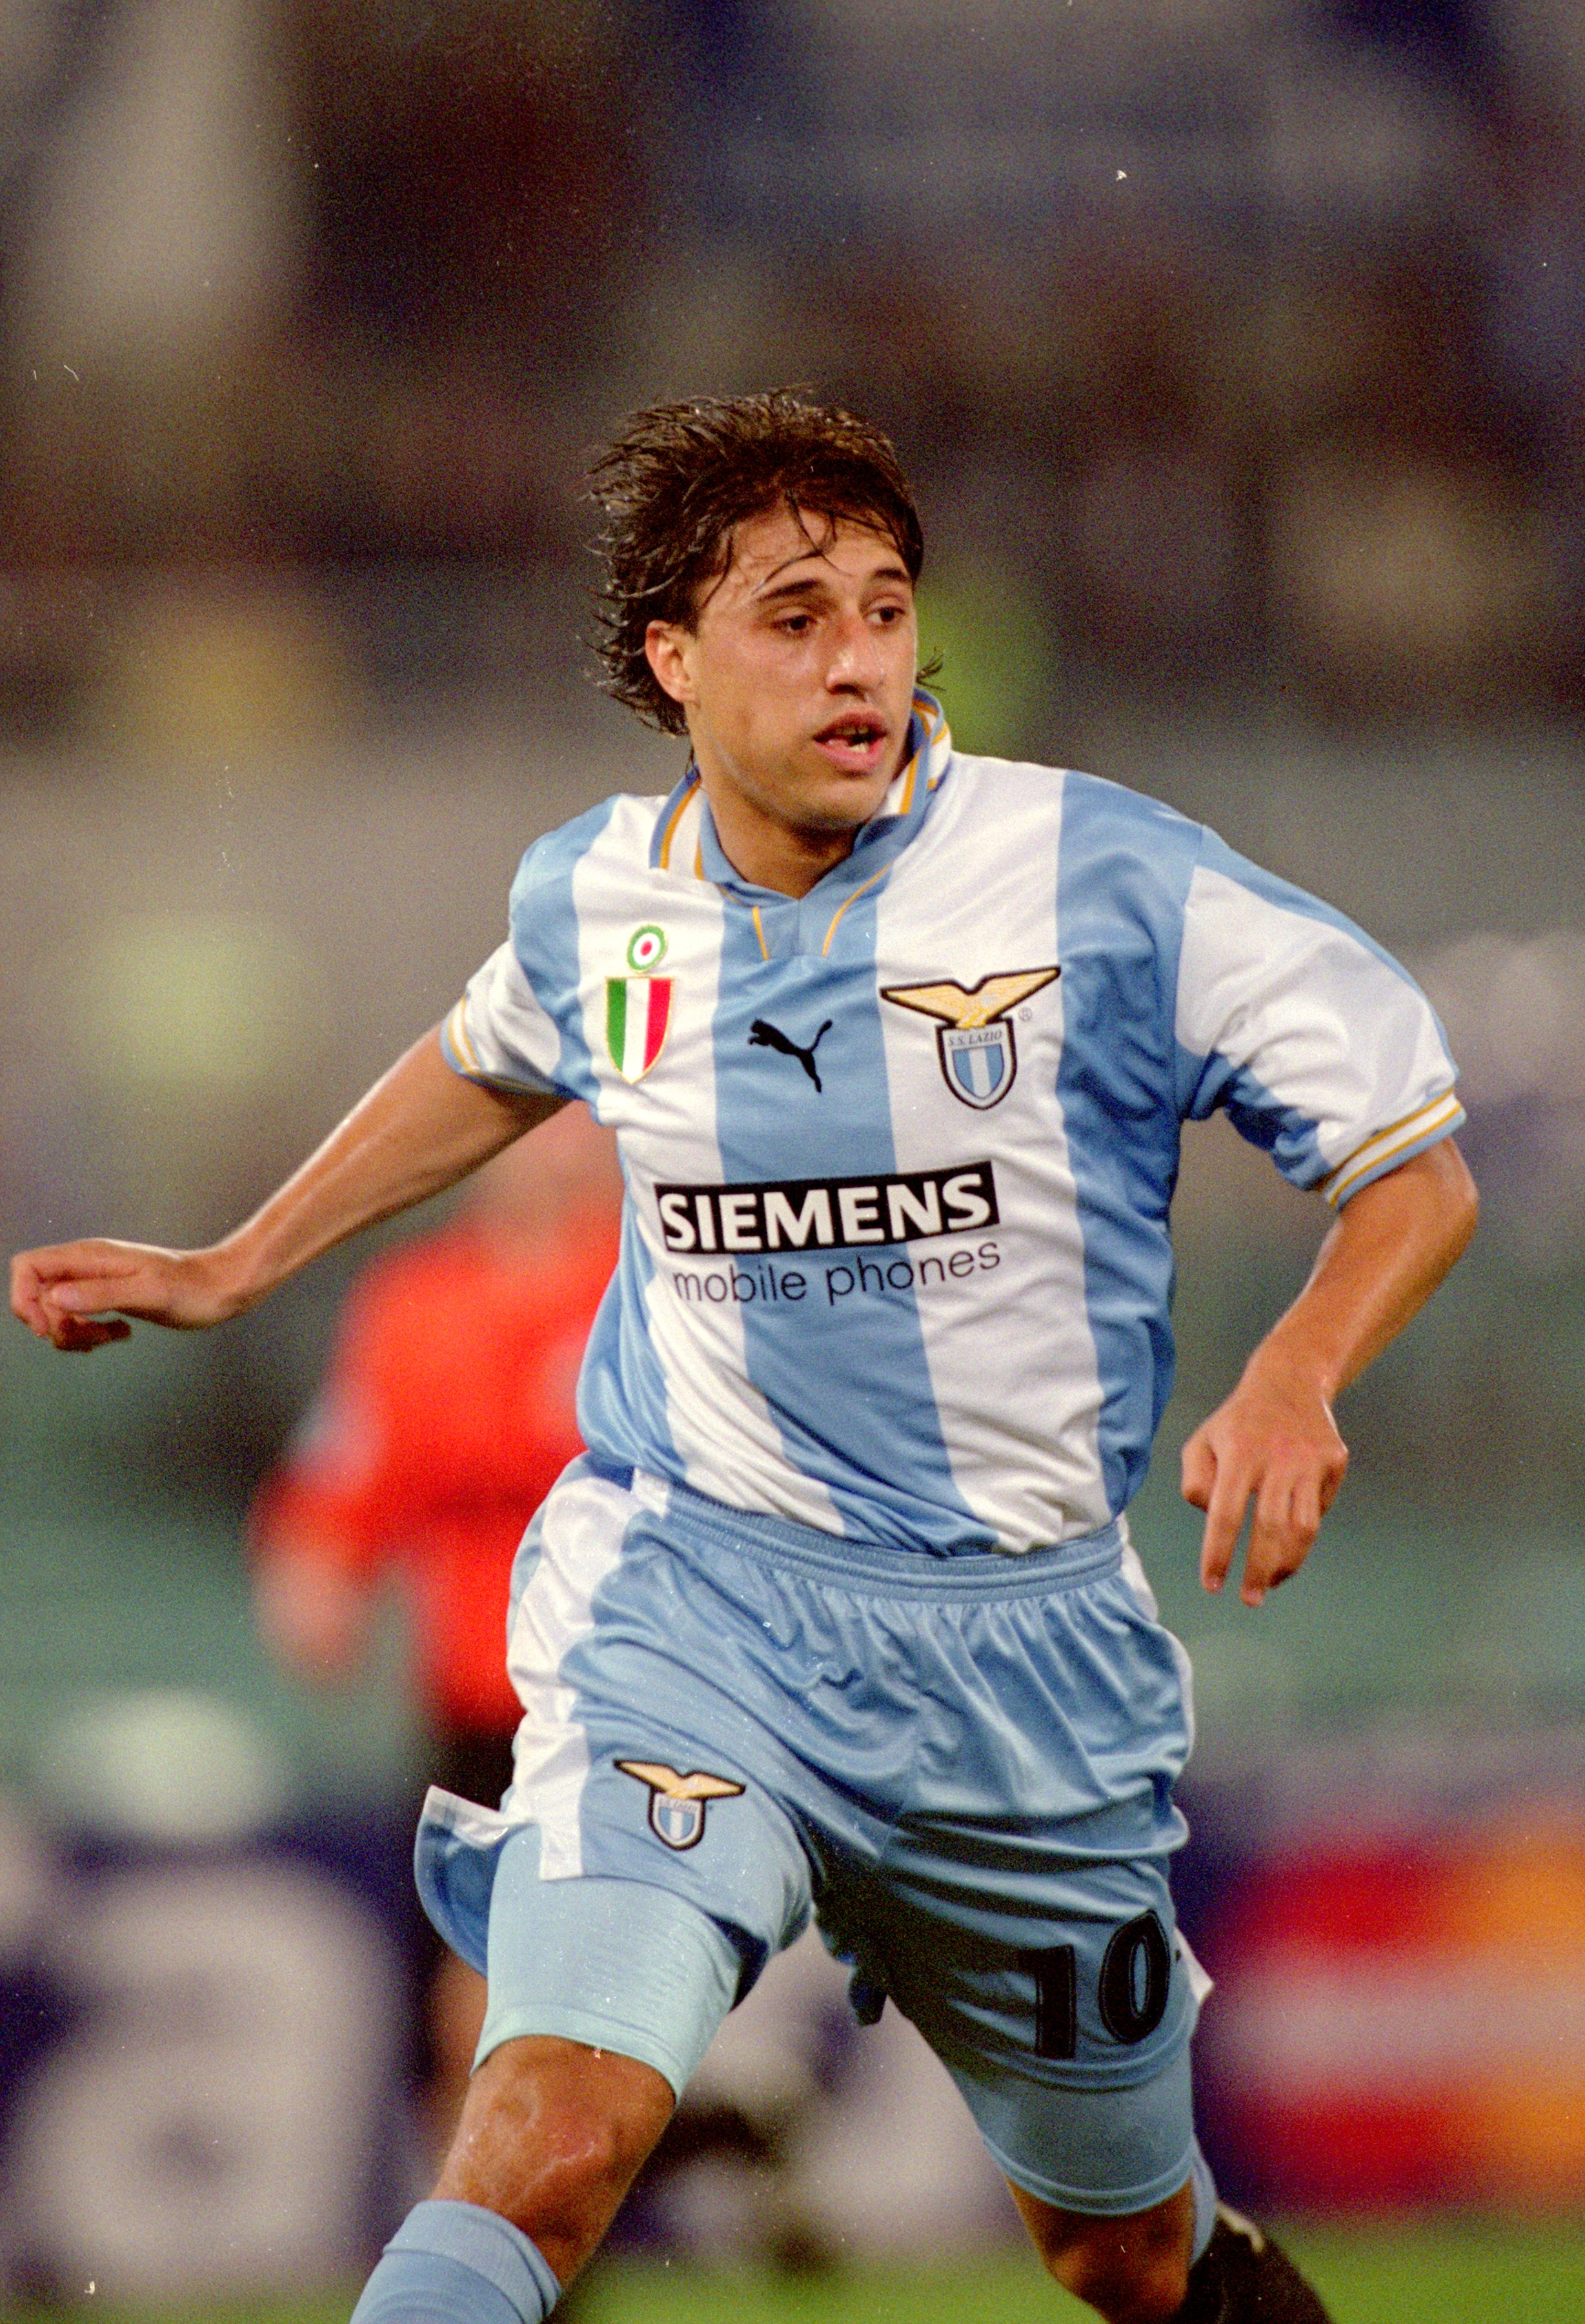 25 Oct 2000:  Hernan Crespo of Lazio in action during the UEFA Champions League match against Shakhtar Donetsk played at the Stadio Olimpico, in Rome, Italy. Lazio won the match 5-1. \ Mandatory Credit: Stuart Franklin /Allsport